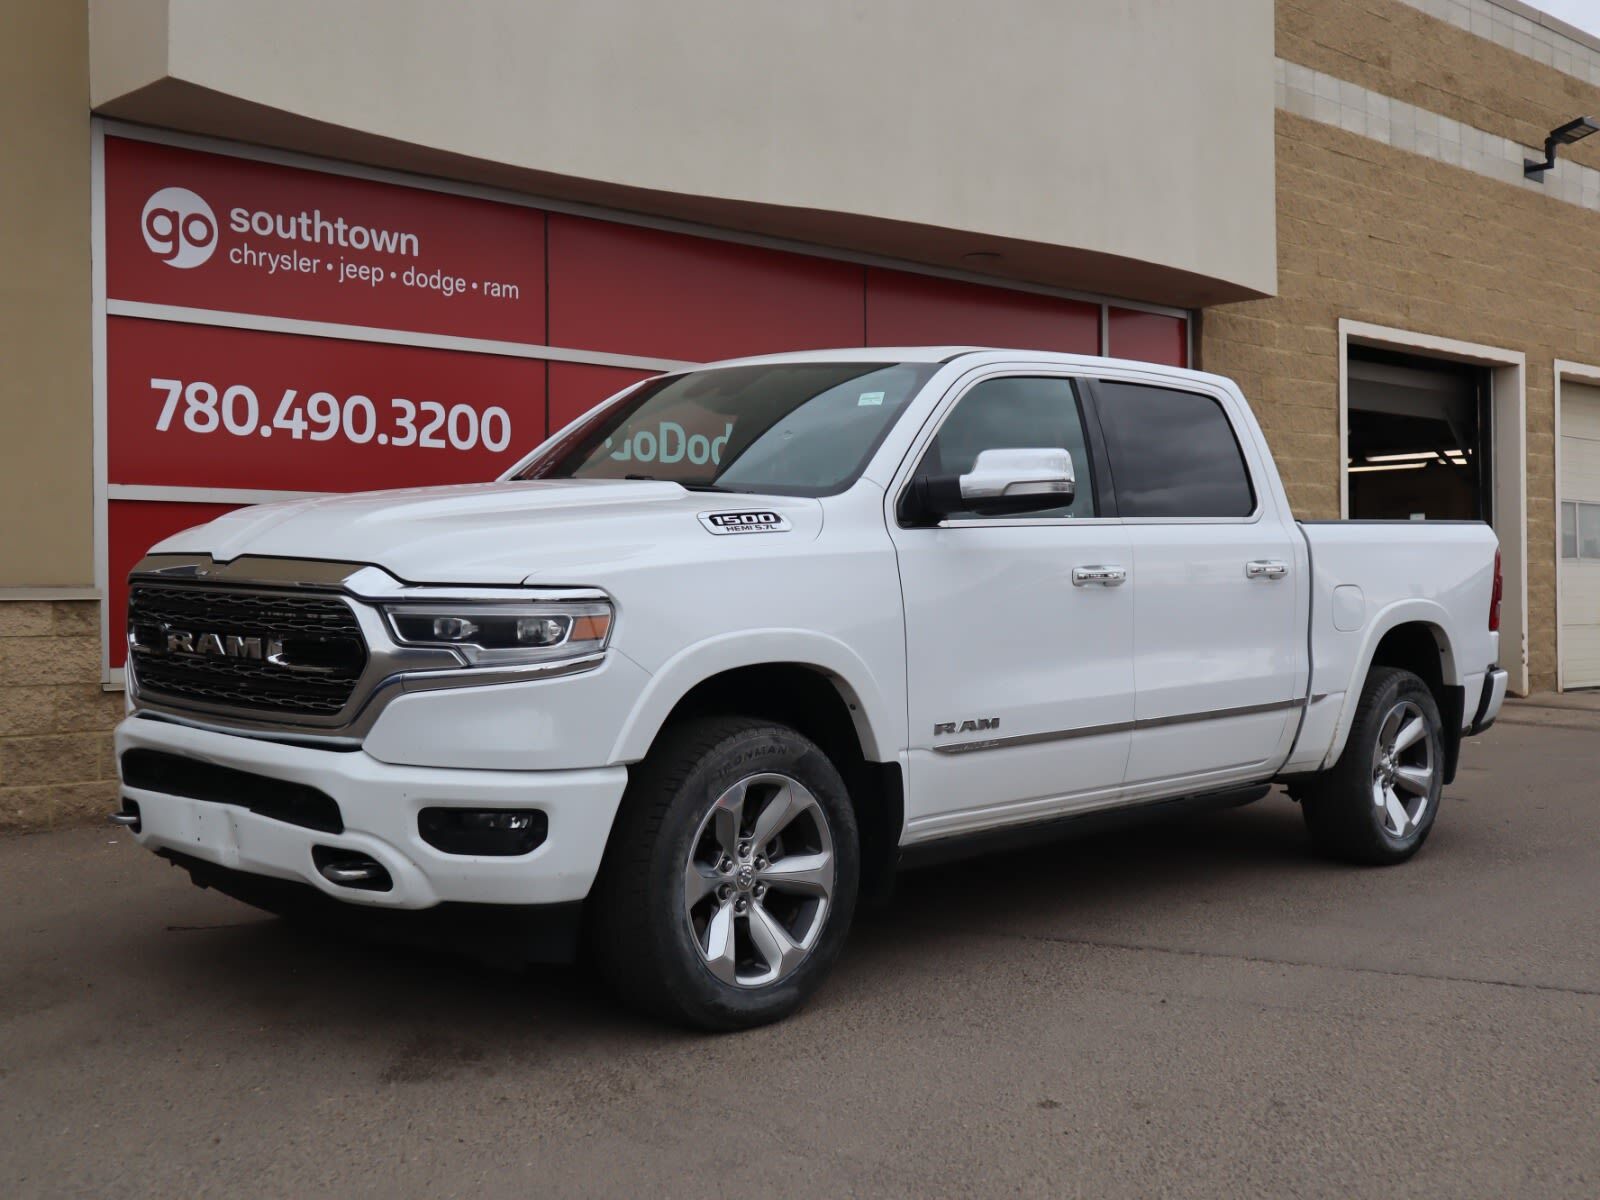 2020 Ram 1500 LIMITED IN BRIGHT WHITE EQUIPPED WITH A 5.7L HEMI 